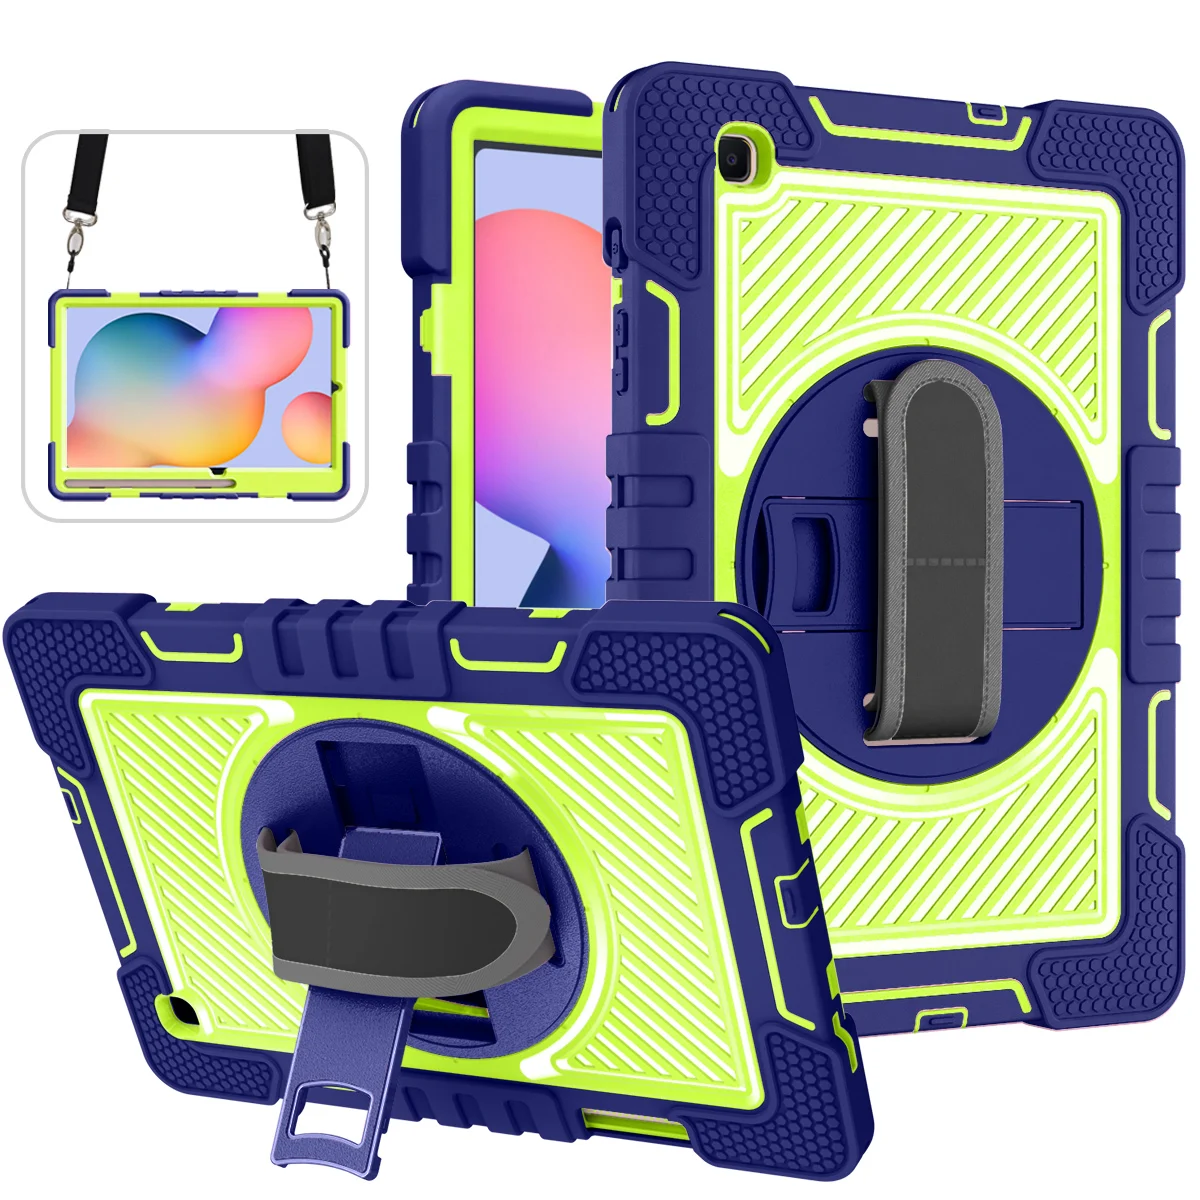 

For Samsung Galaxy Tab S6 Lite 10.4 inch 2020 2022 SM-P610 P615 SM-P613 P619 Case Kids Hand Shoulder Strap Stand Tablet Cover